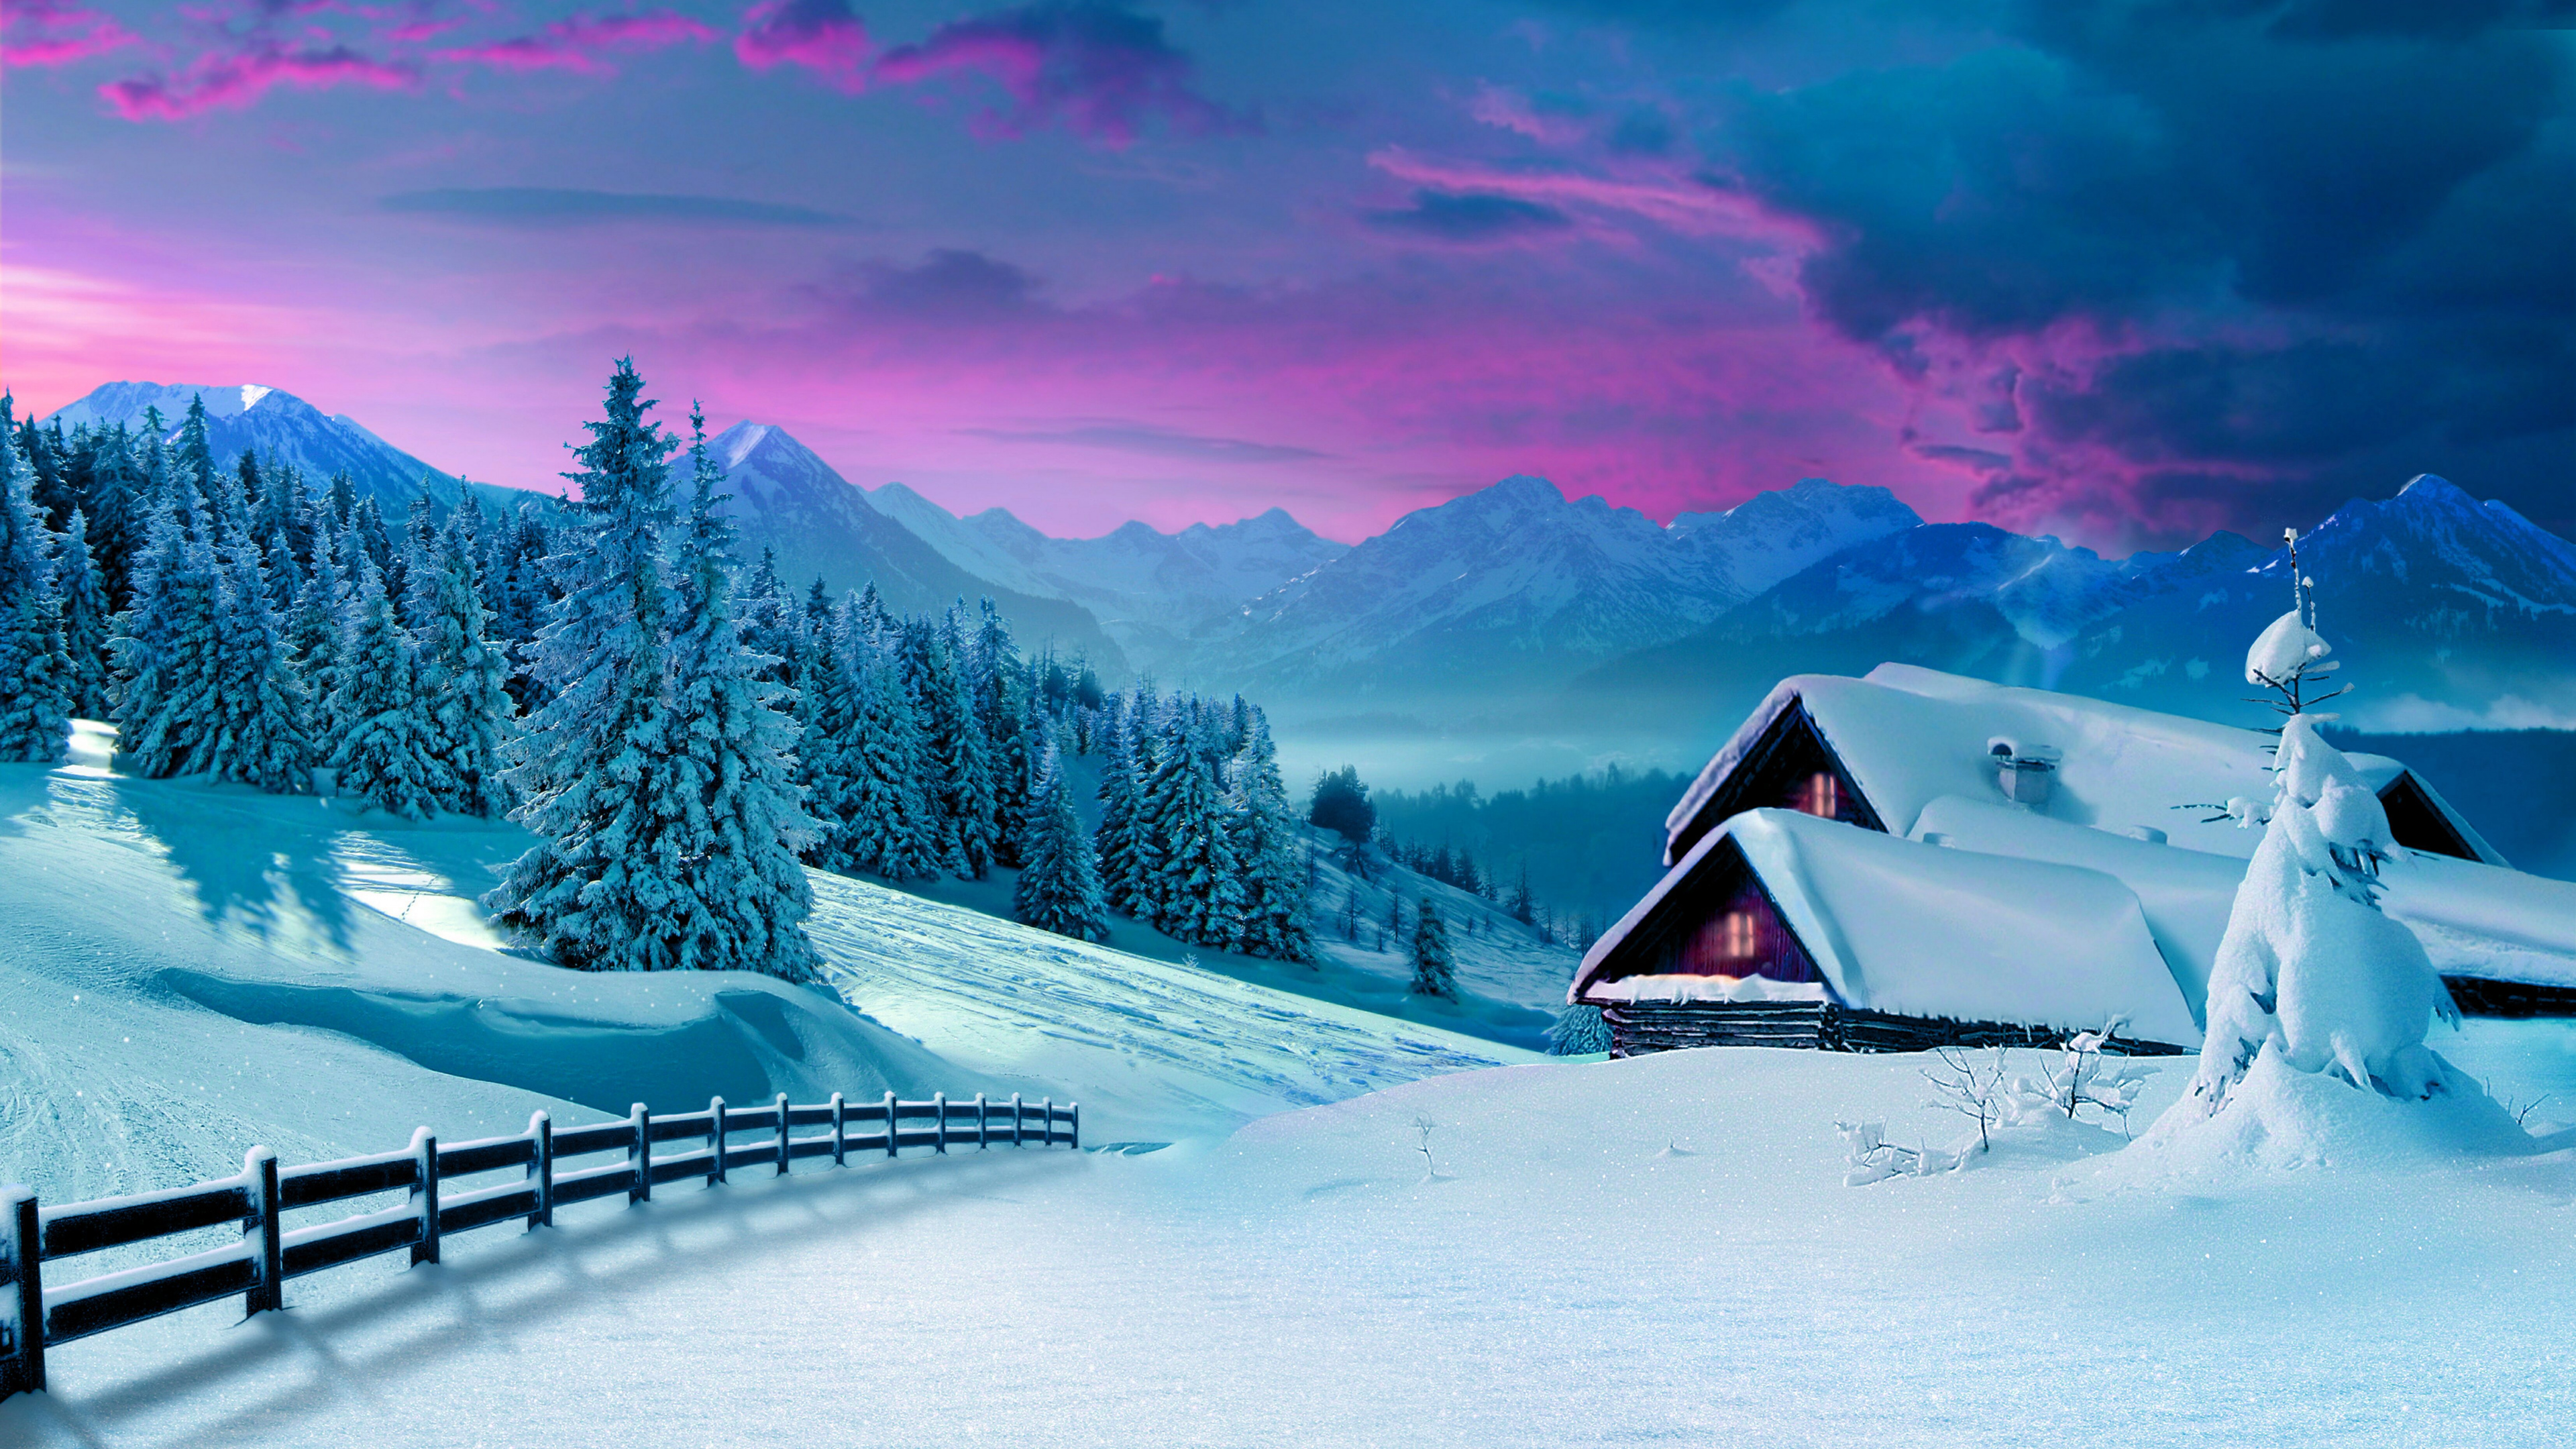 Brown Wooden House on Snow Covered Ground Near Trees and Mountains During Daytime. Wallpaper in 3840x2160 Resolution